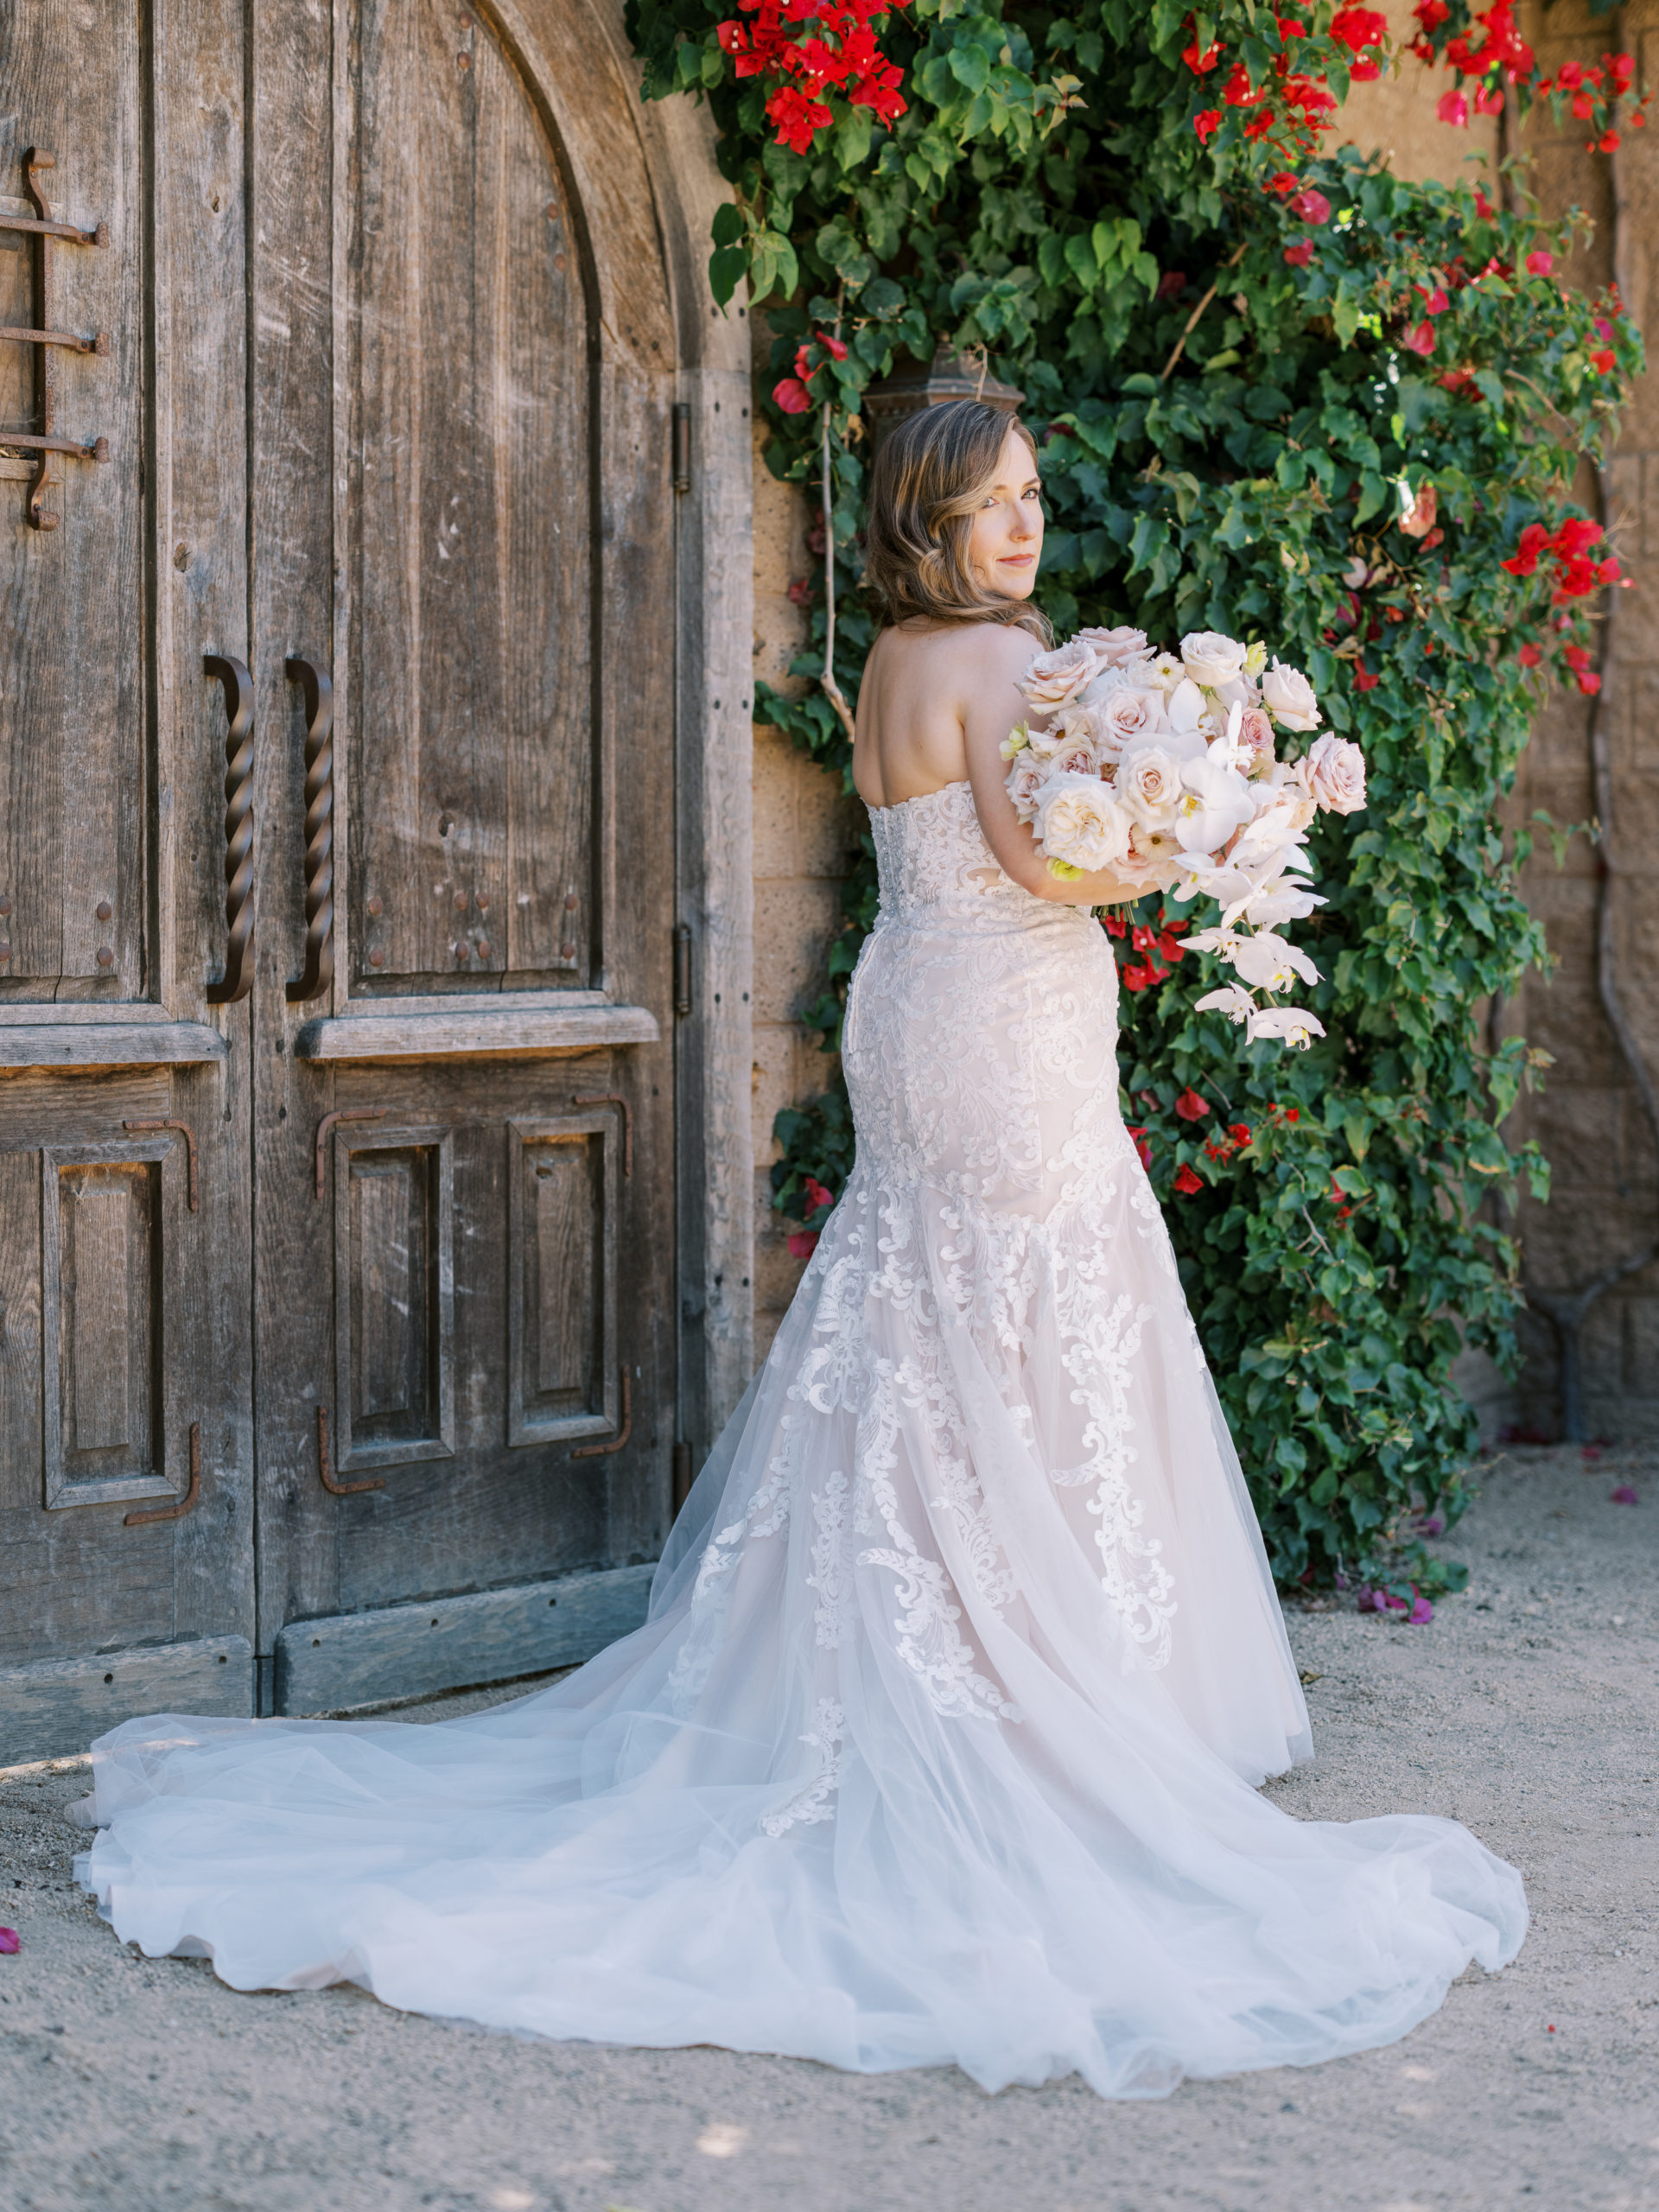 Catalina View Gardens Wedding - The bride stands with the bougainvillea